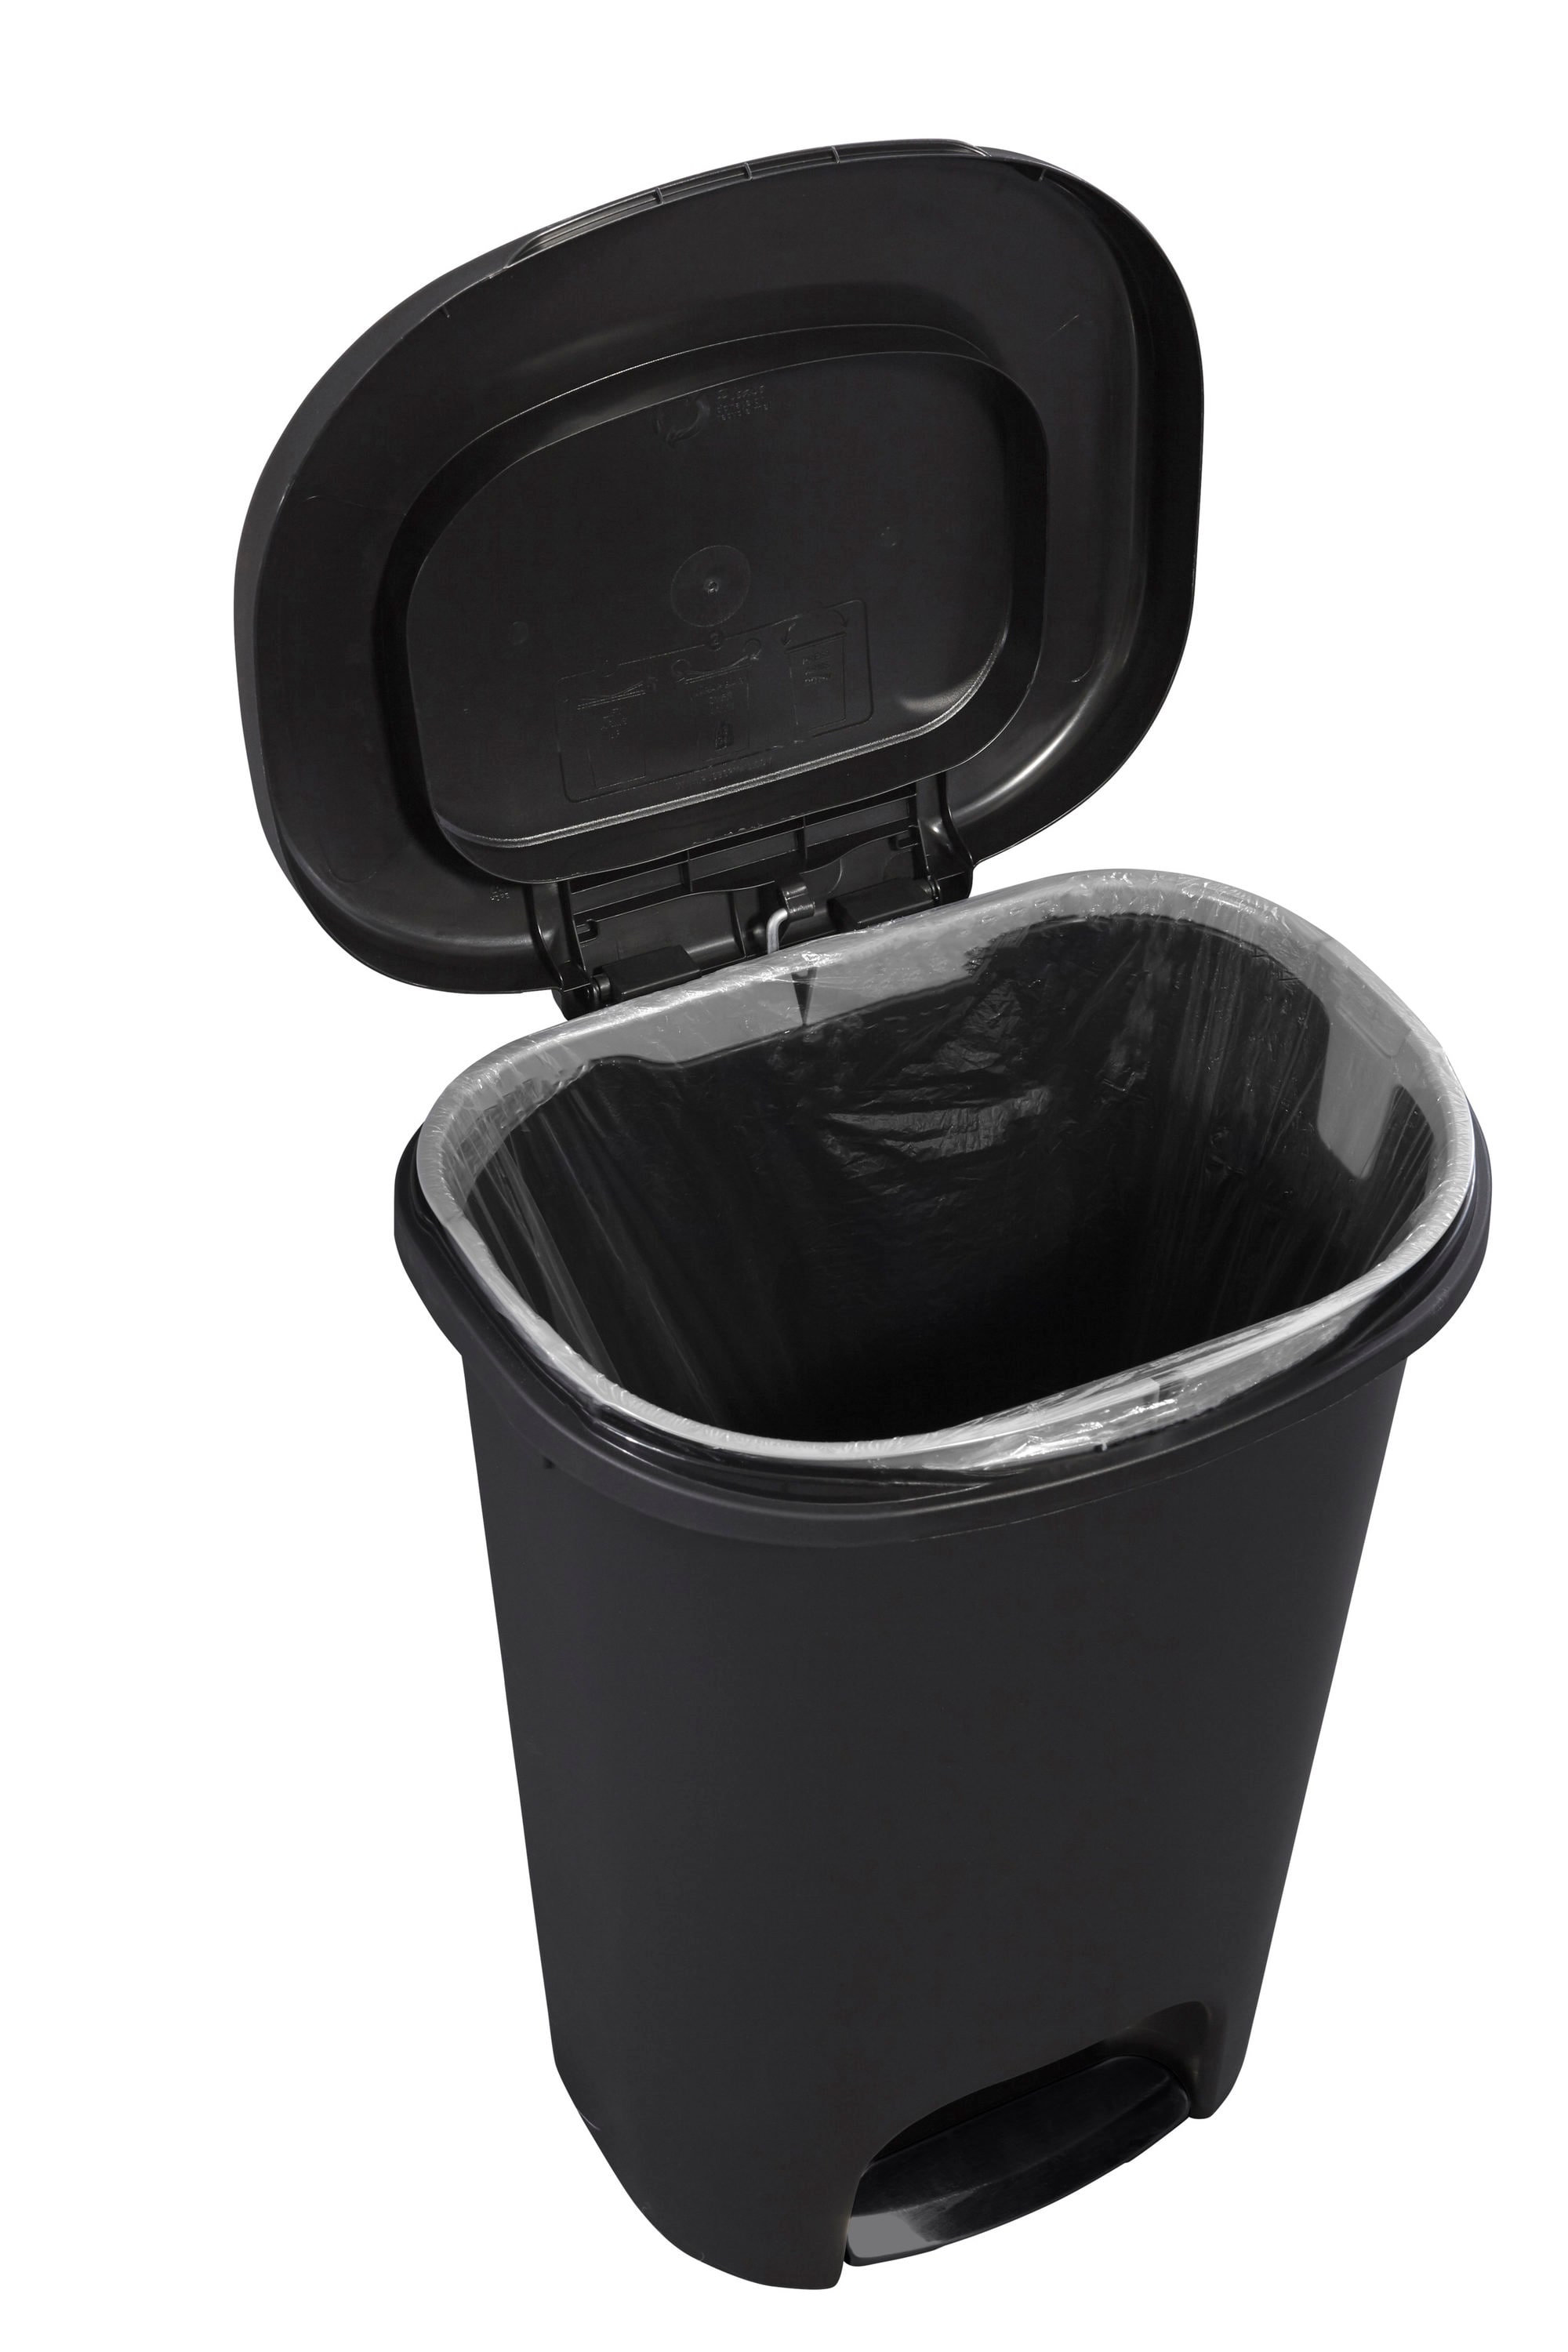 Home Logic 13-Gallon Black Plastic Trash Can with Lid at